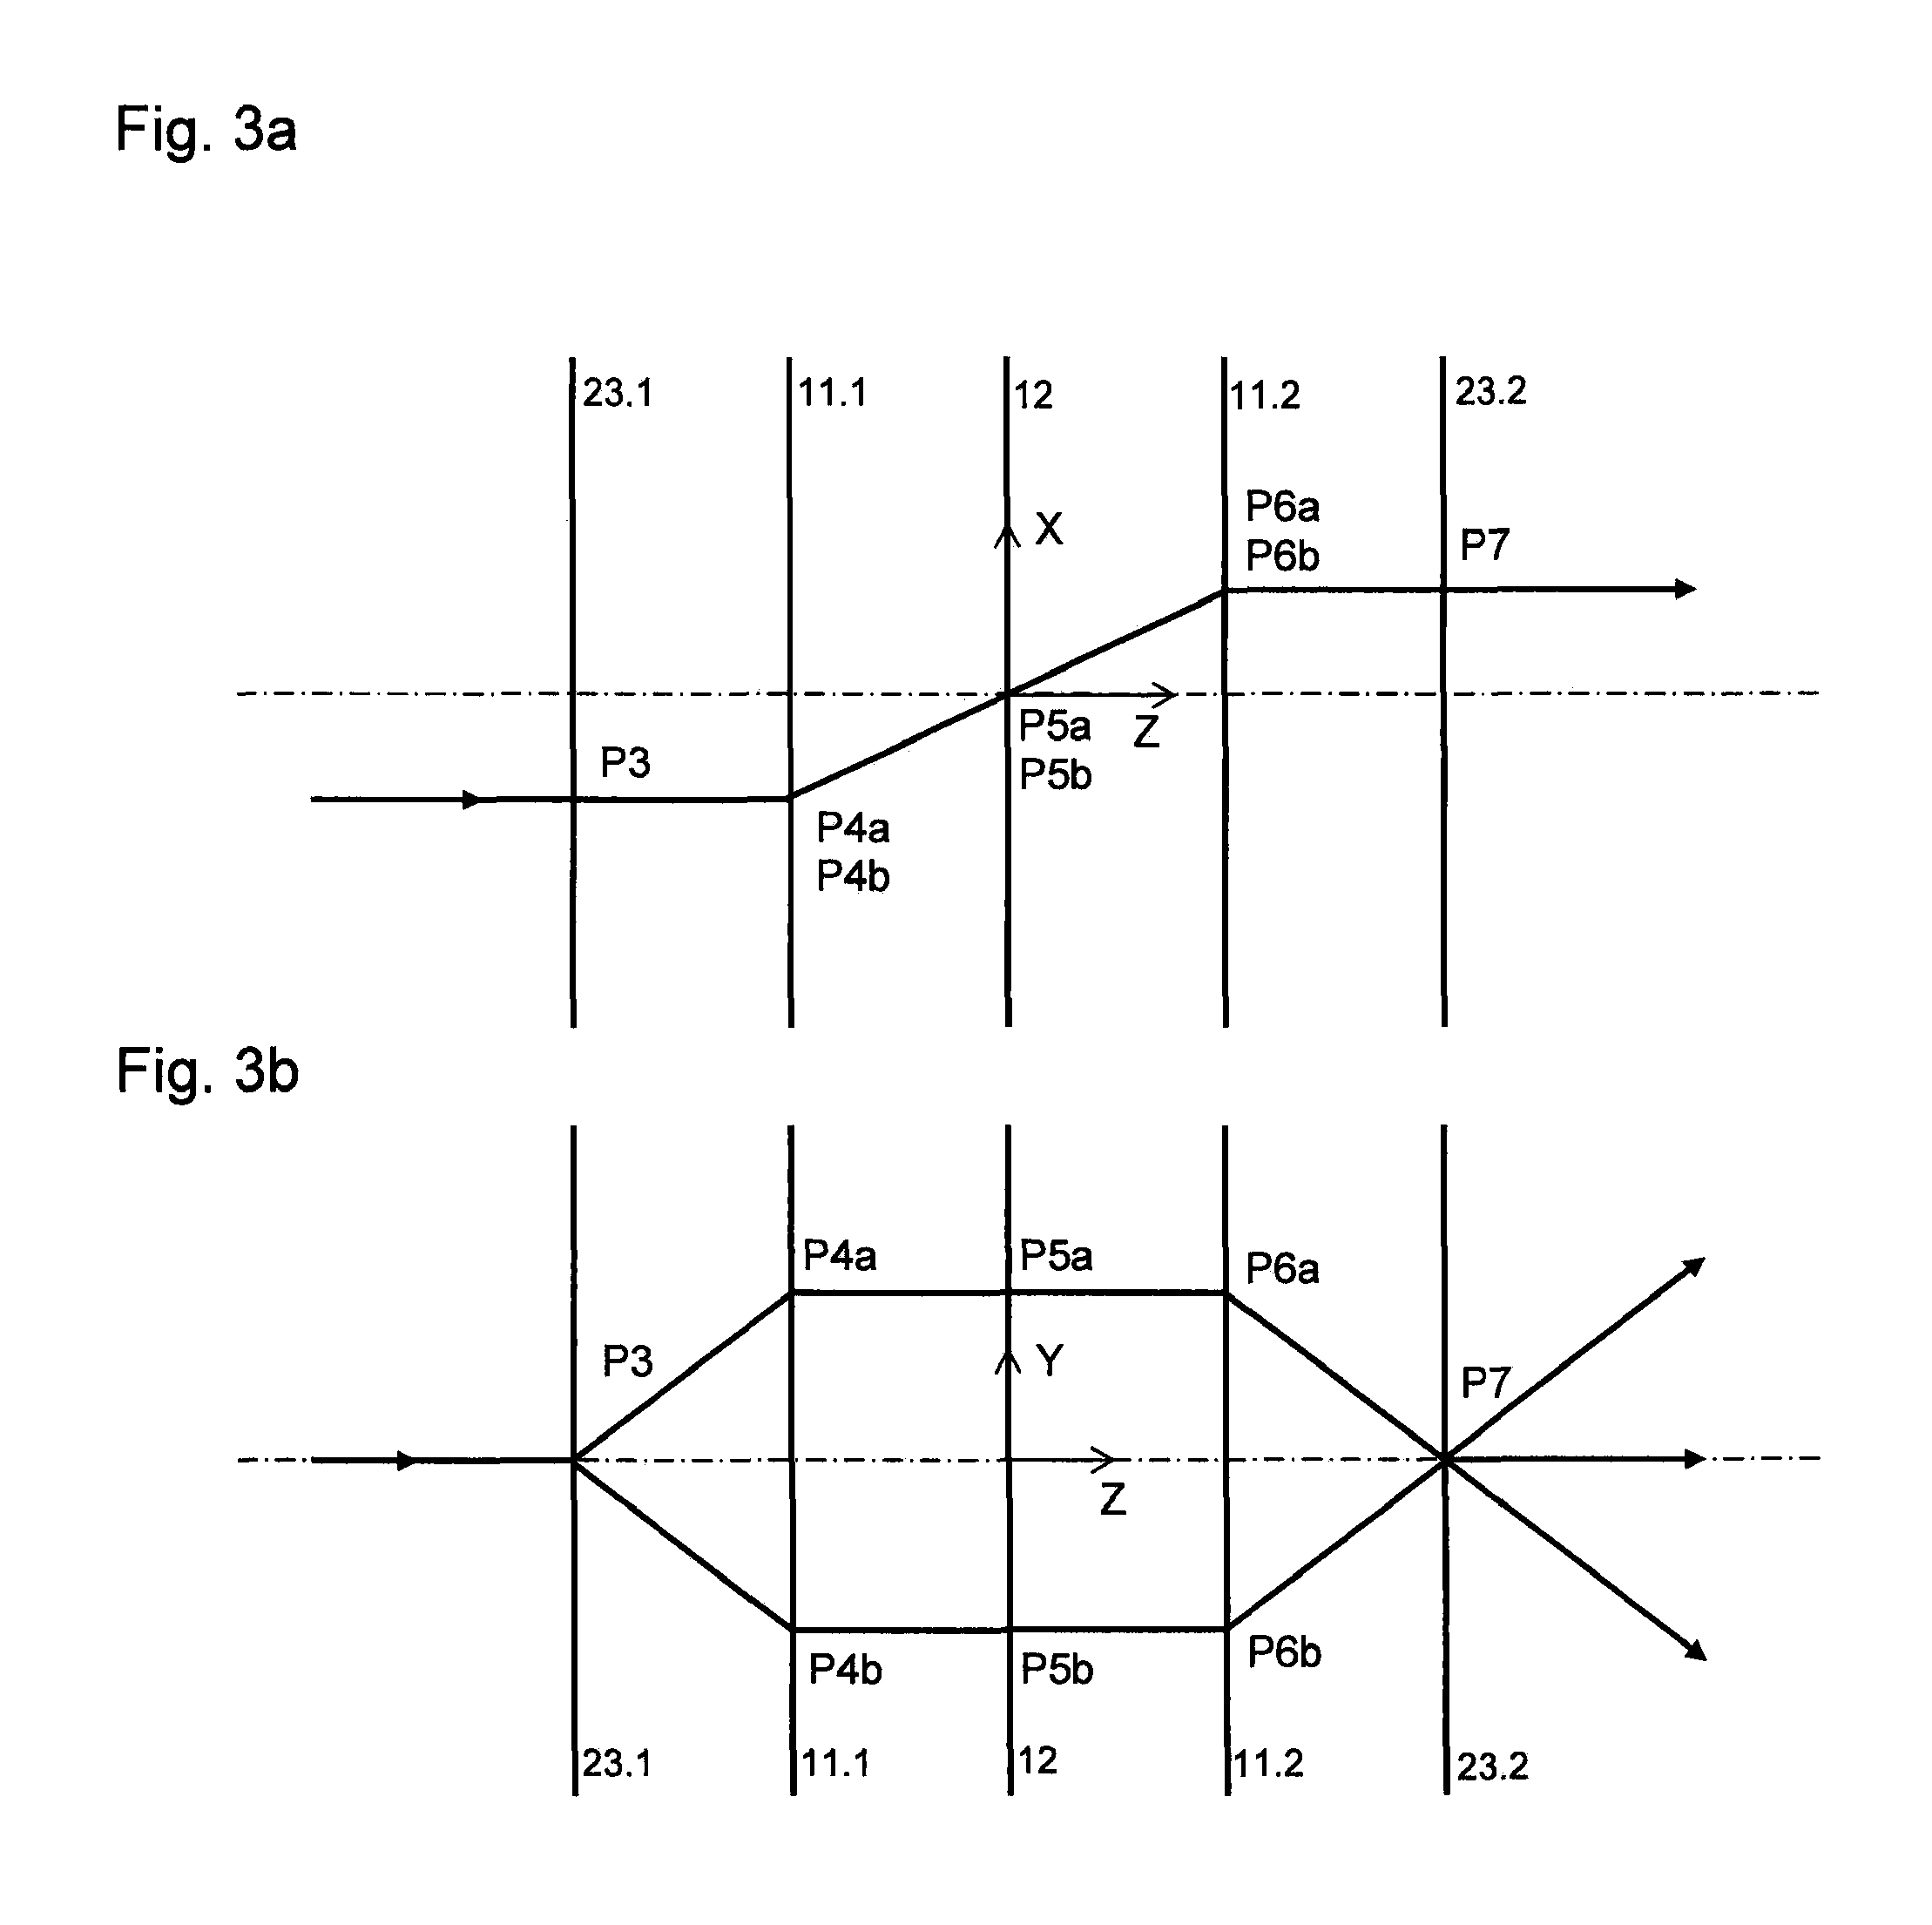 Optical angle-measuring device with combined radial-circular grating